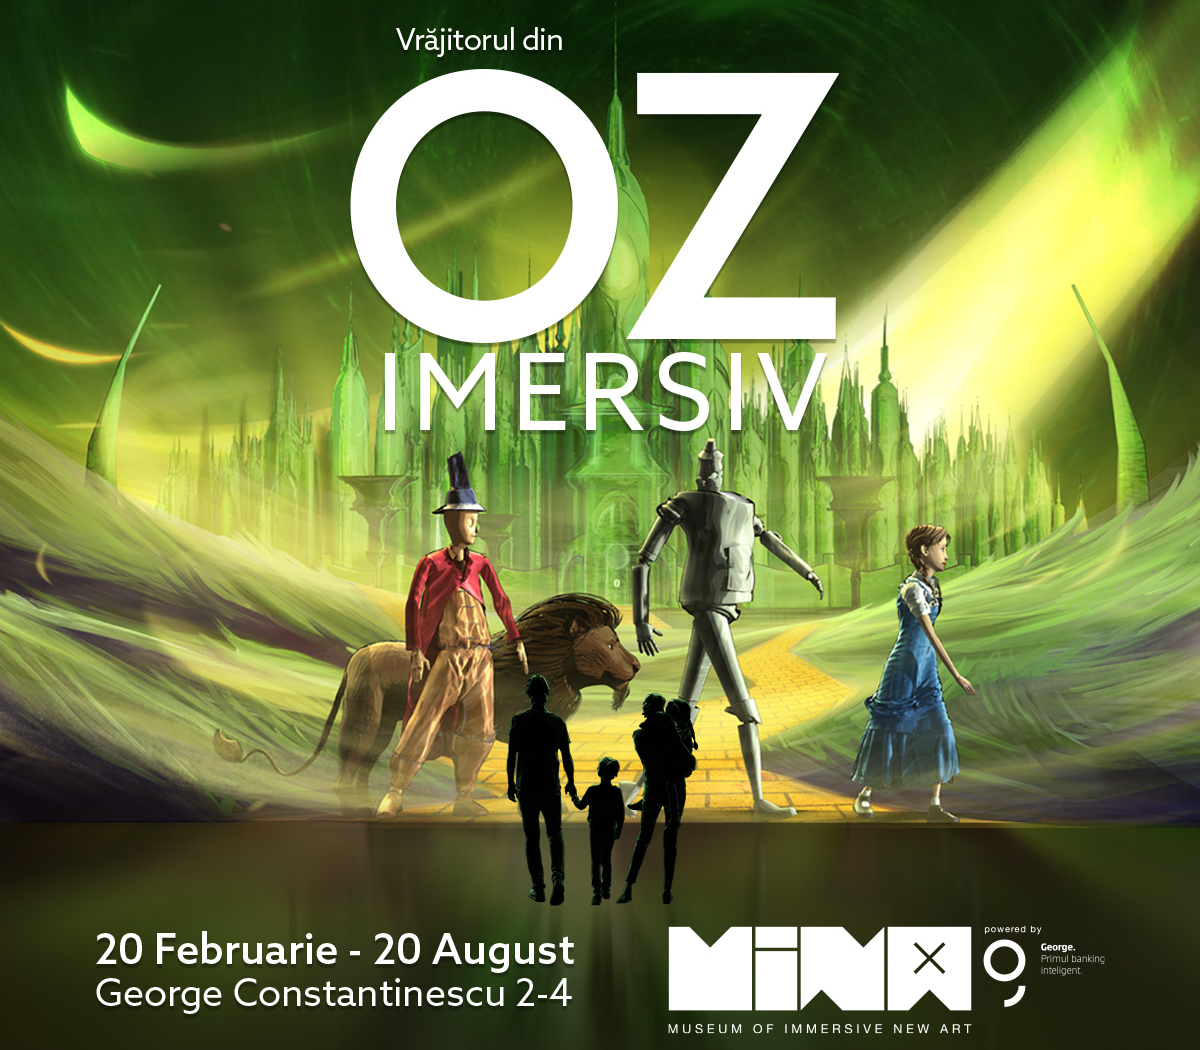 The Wizard of Oz show coming to Bucharest’s Museum of Immersive New Art in February